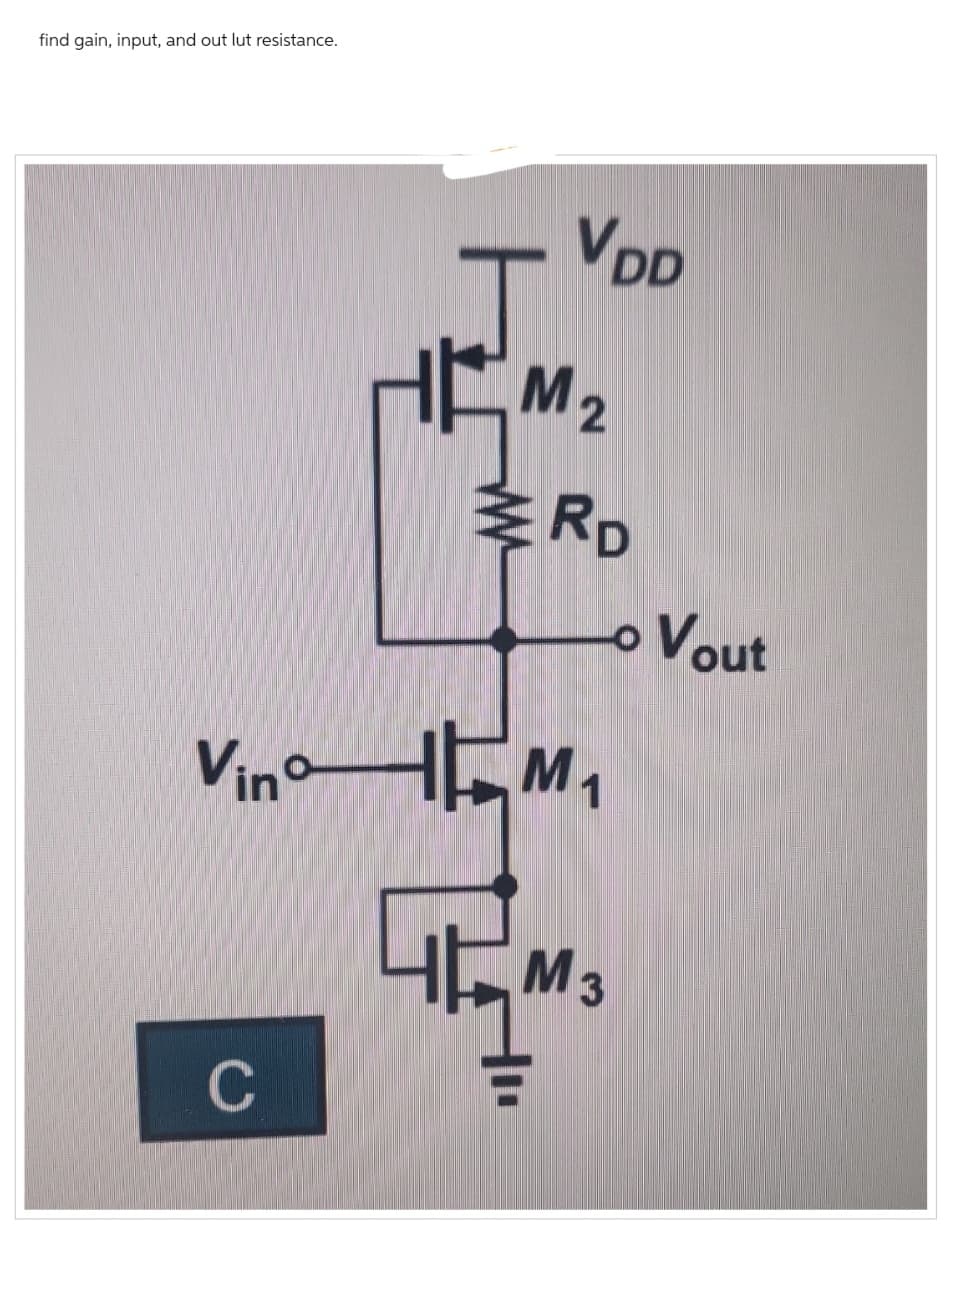 find gain, input, and out lut resistance.
VDD
M2
RD
Vin M₁
Чем з
3
o Vout
C